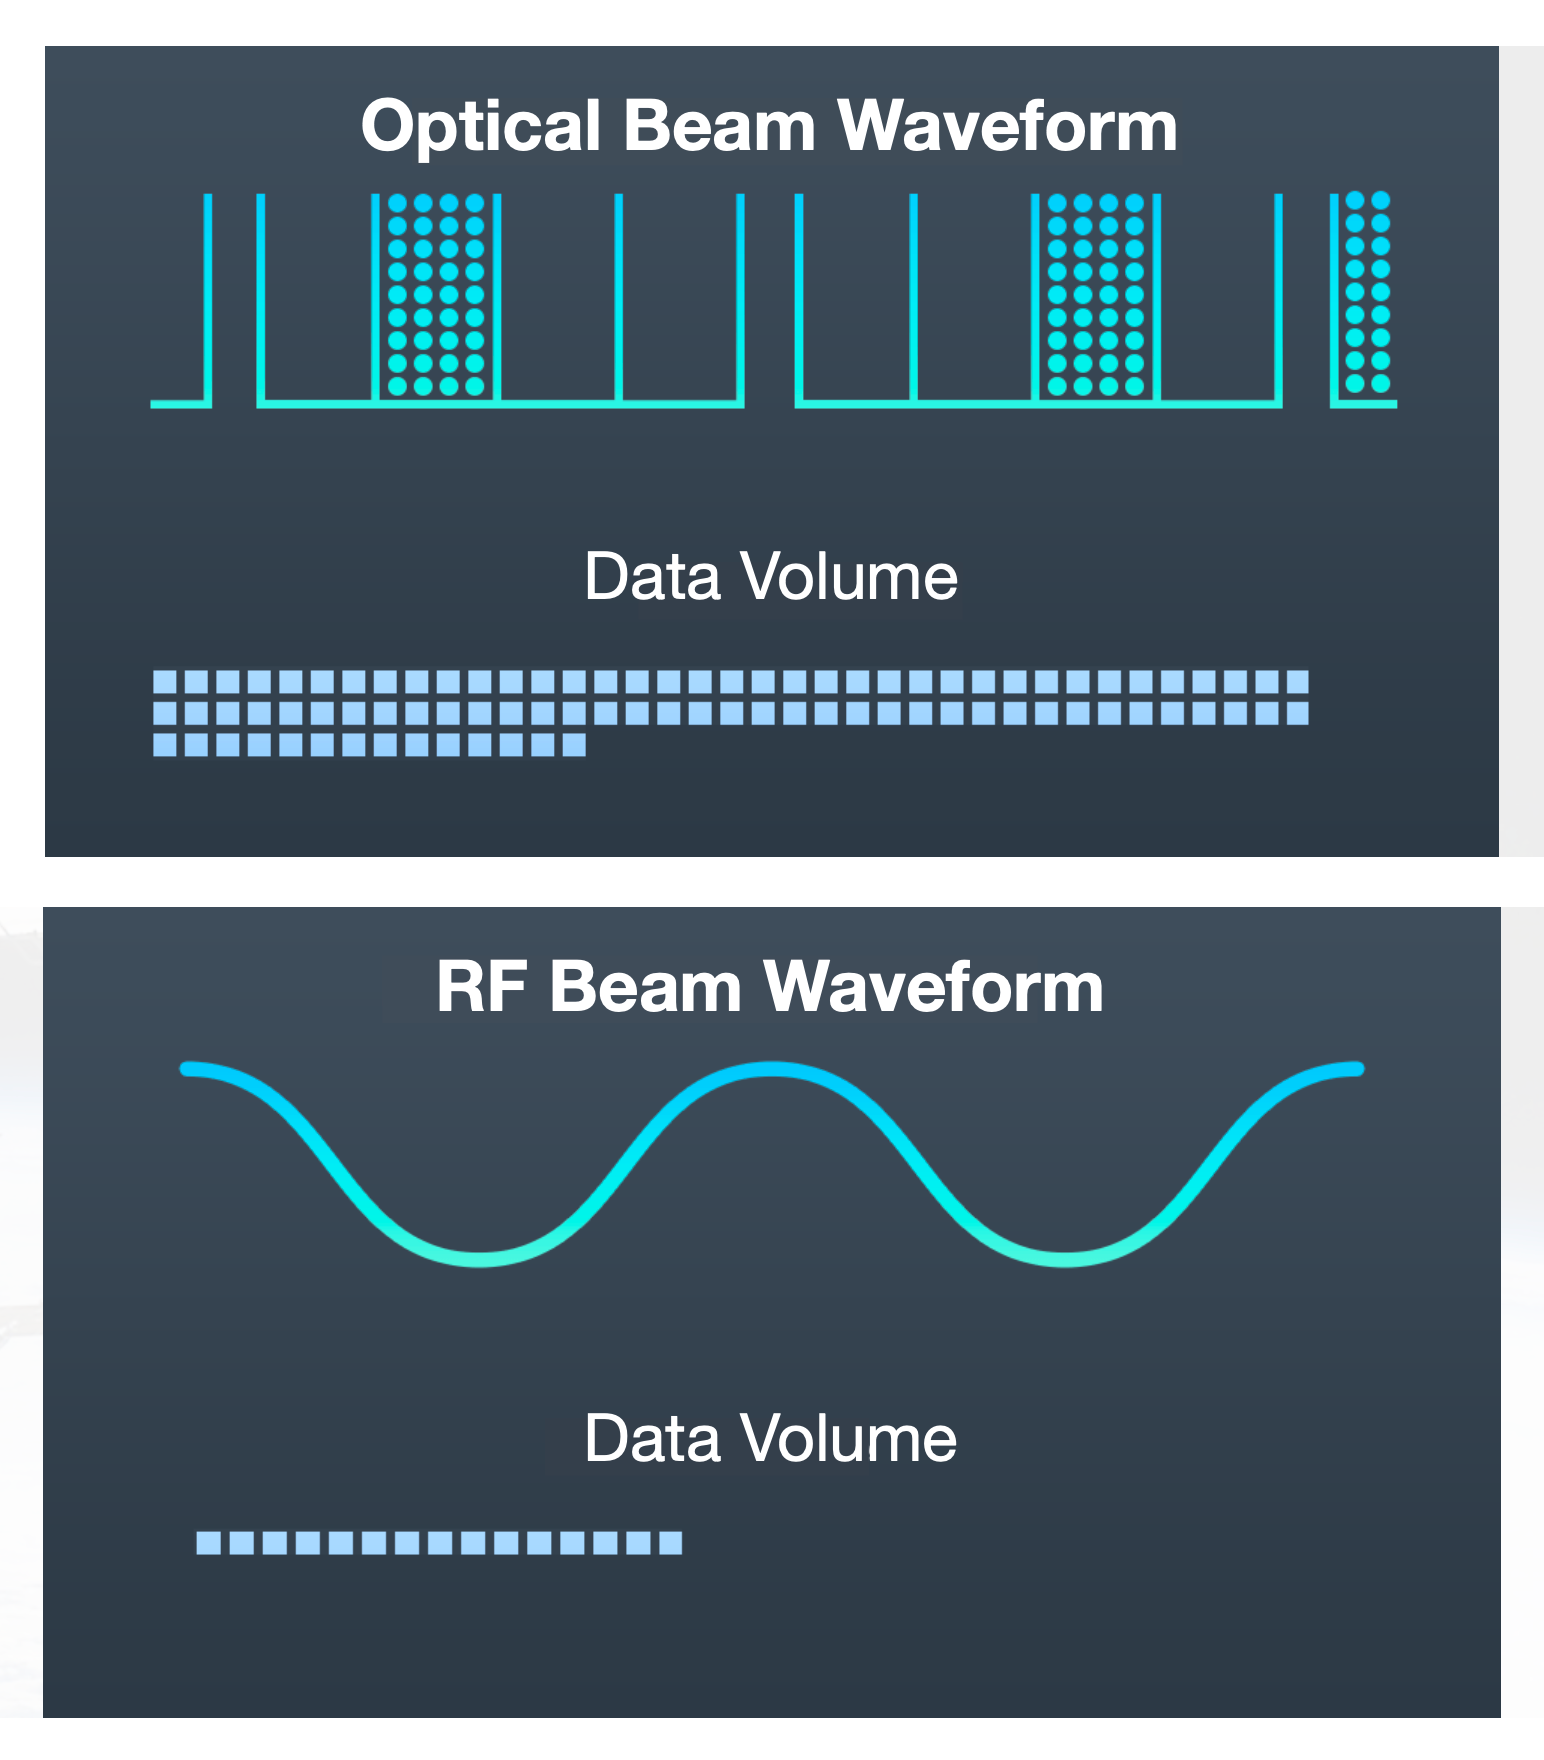 Top of the image is titled "Opitcal Beam Waveform" with several columns. Below there's an image titled "RF Beam Waveform" with a wave. Beneath both is a "Data Volume" label, with the top image having three rows of circles and the bottom image with one row.